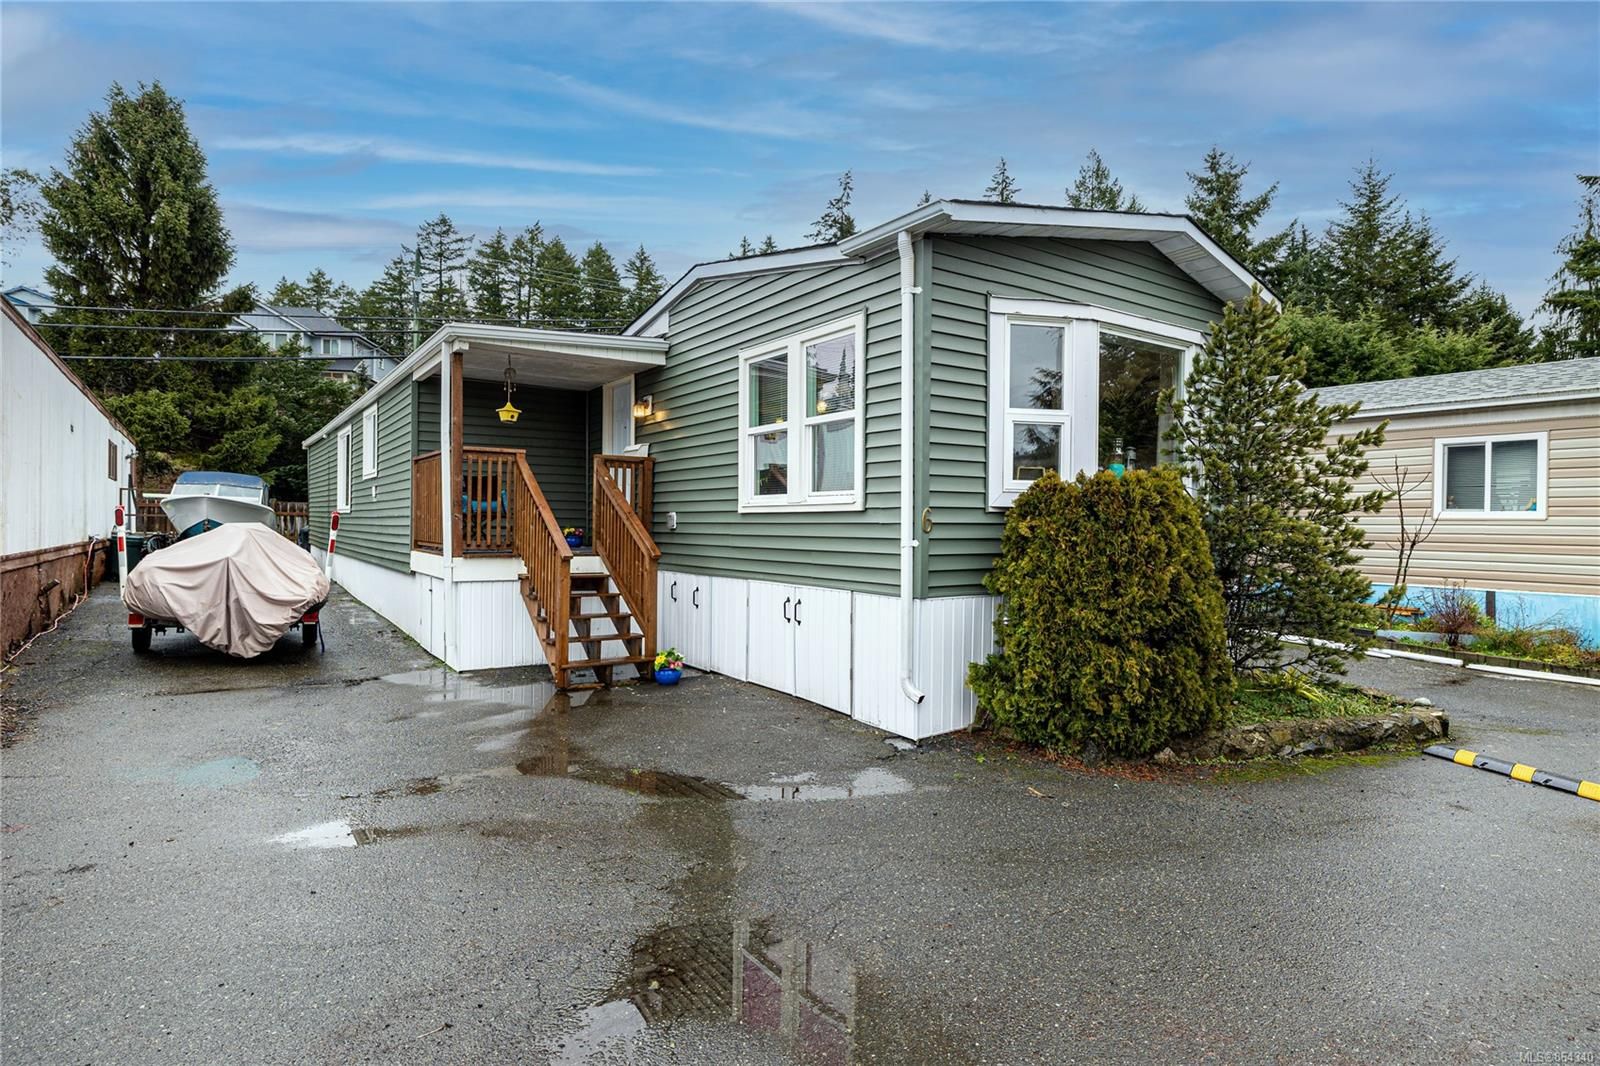 Welcome to number 6 2847 Sooke Lake Rd. Family, pet and rental friendly. New Roof, New siding and skirting.